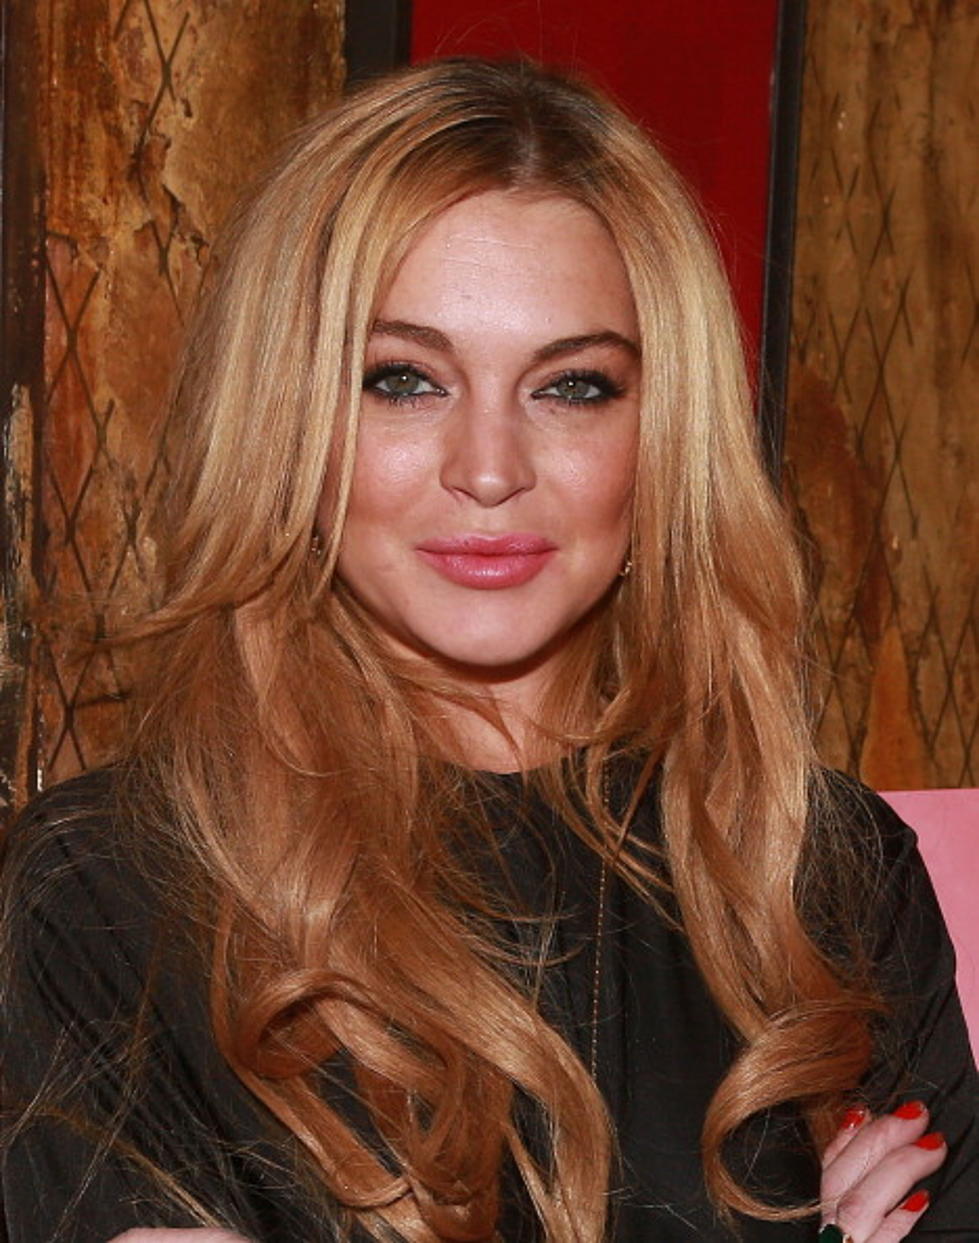 Lindsay Lohan to Be Face of Allstate